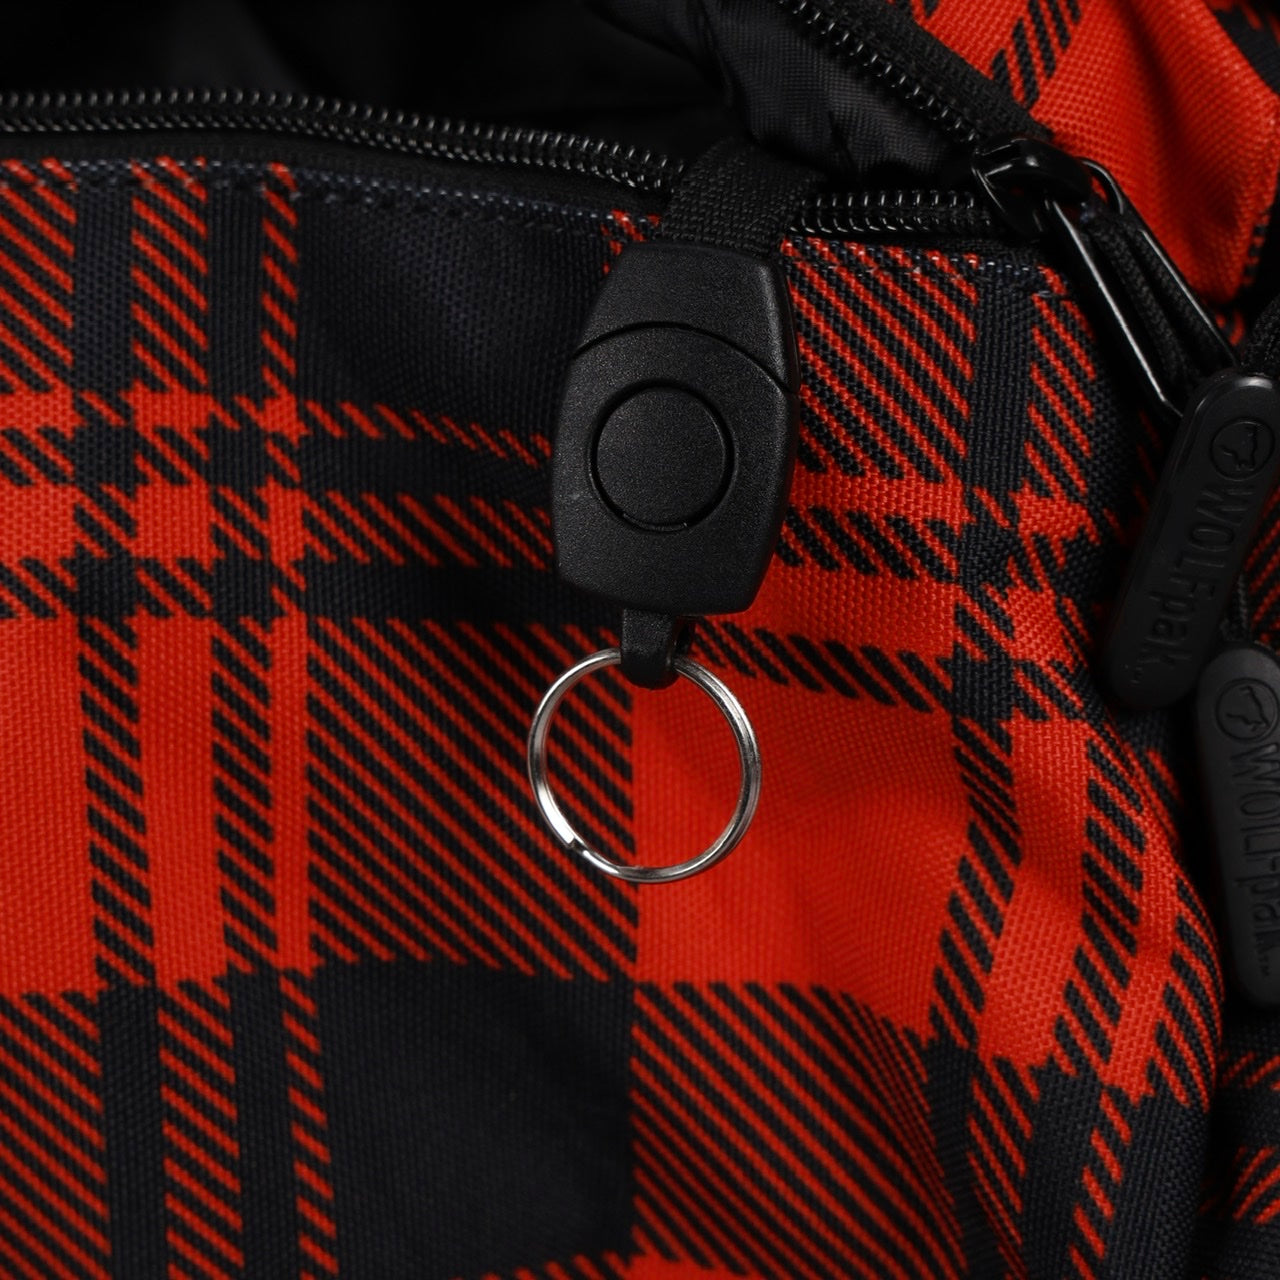 Buffalo Red Plaid Classic Backpack